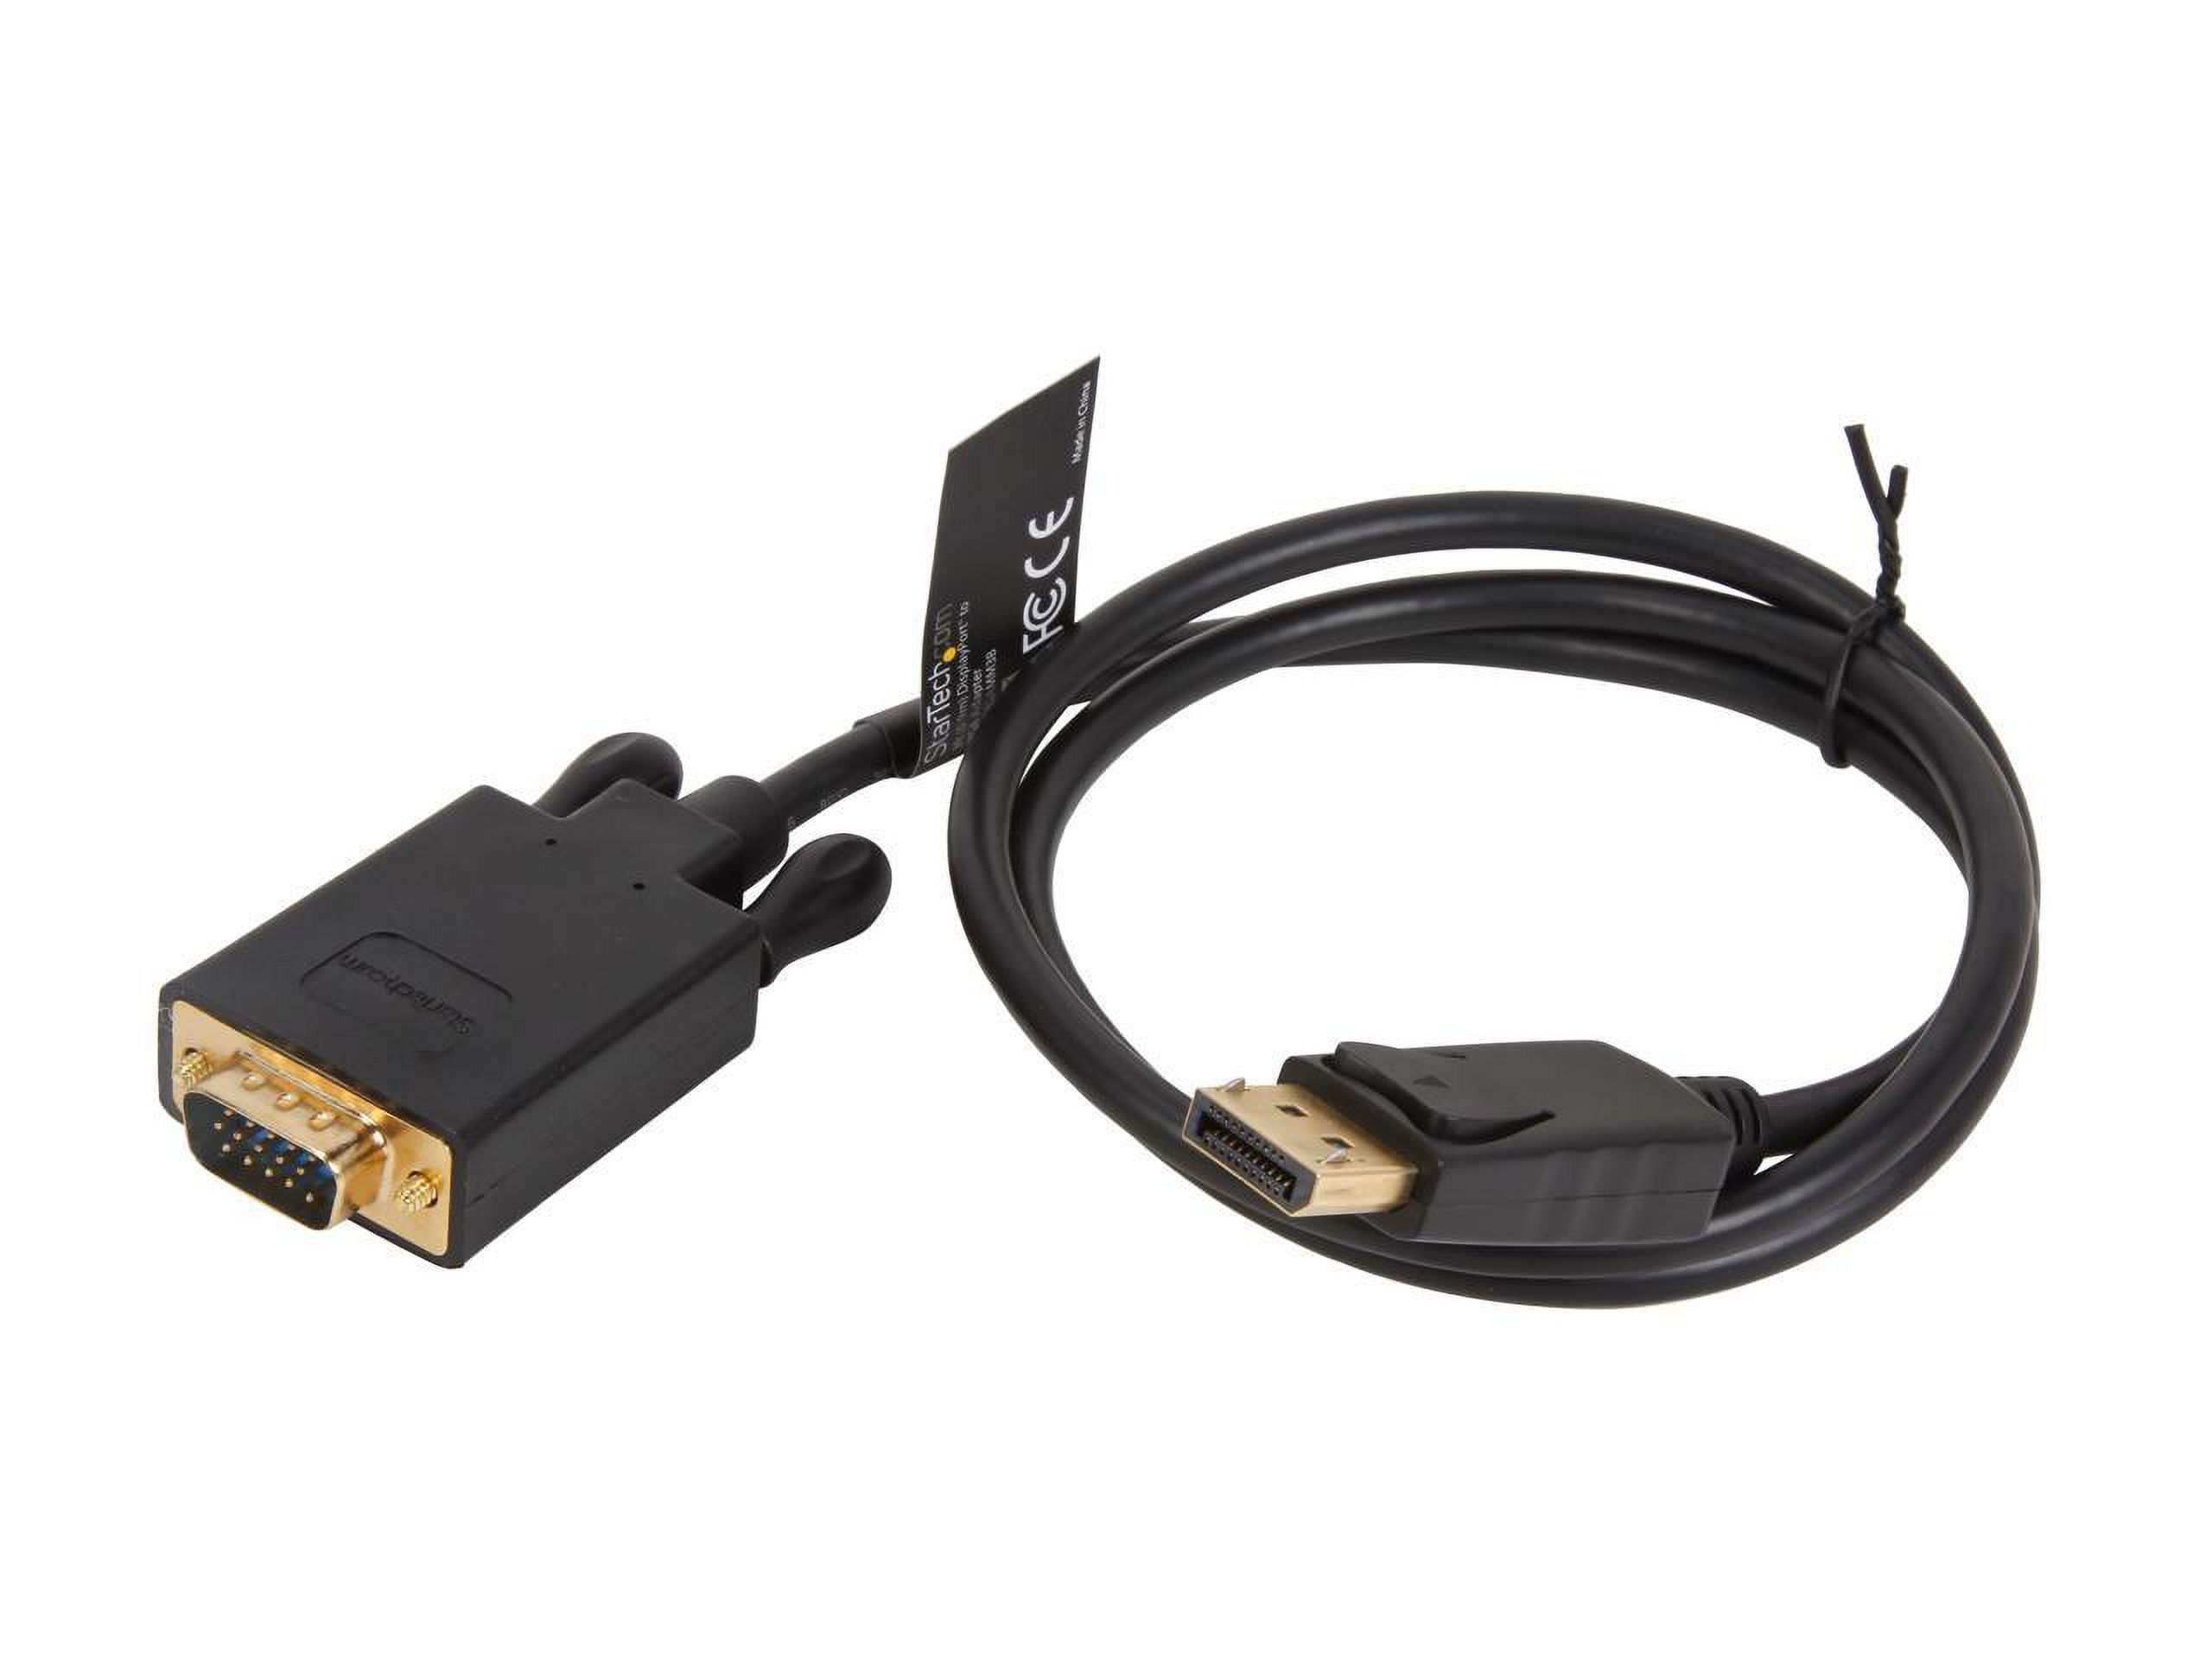 StarTech DP2VGAMM3B 3 ft. DisplayPort to VGA Adapter Cable - DP to VGA Video Converter - Active DisplayPort to VGA Cable for PC 1920 x 1200 - Black - image 2 of 3